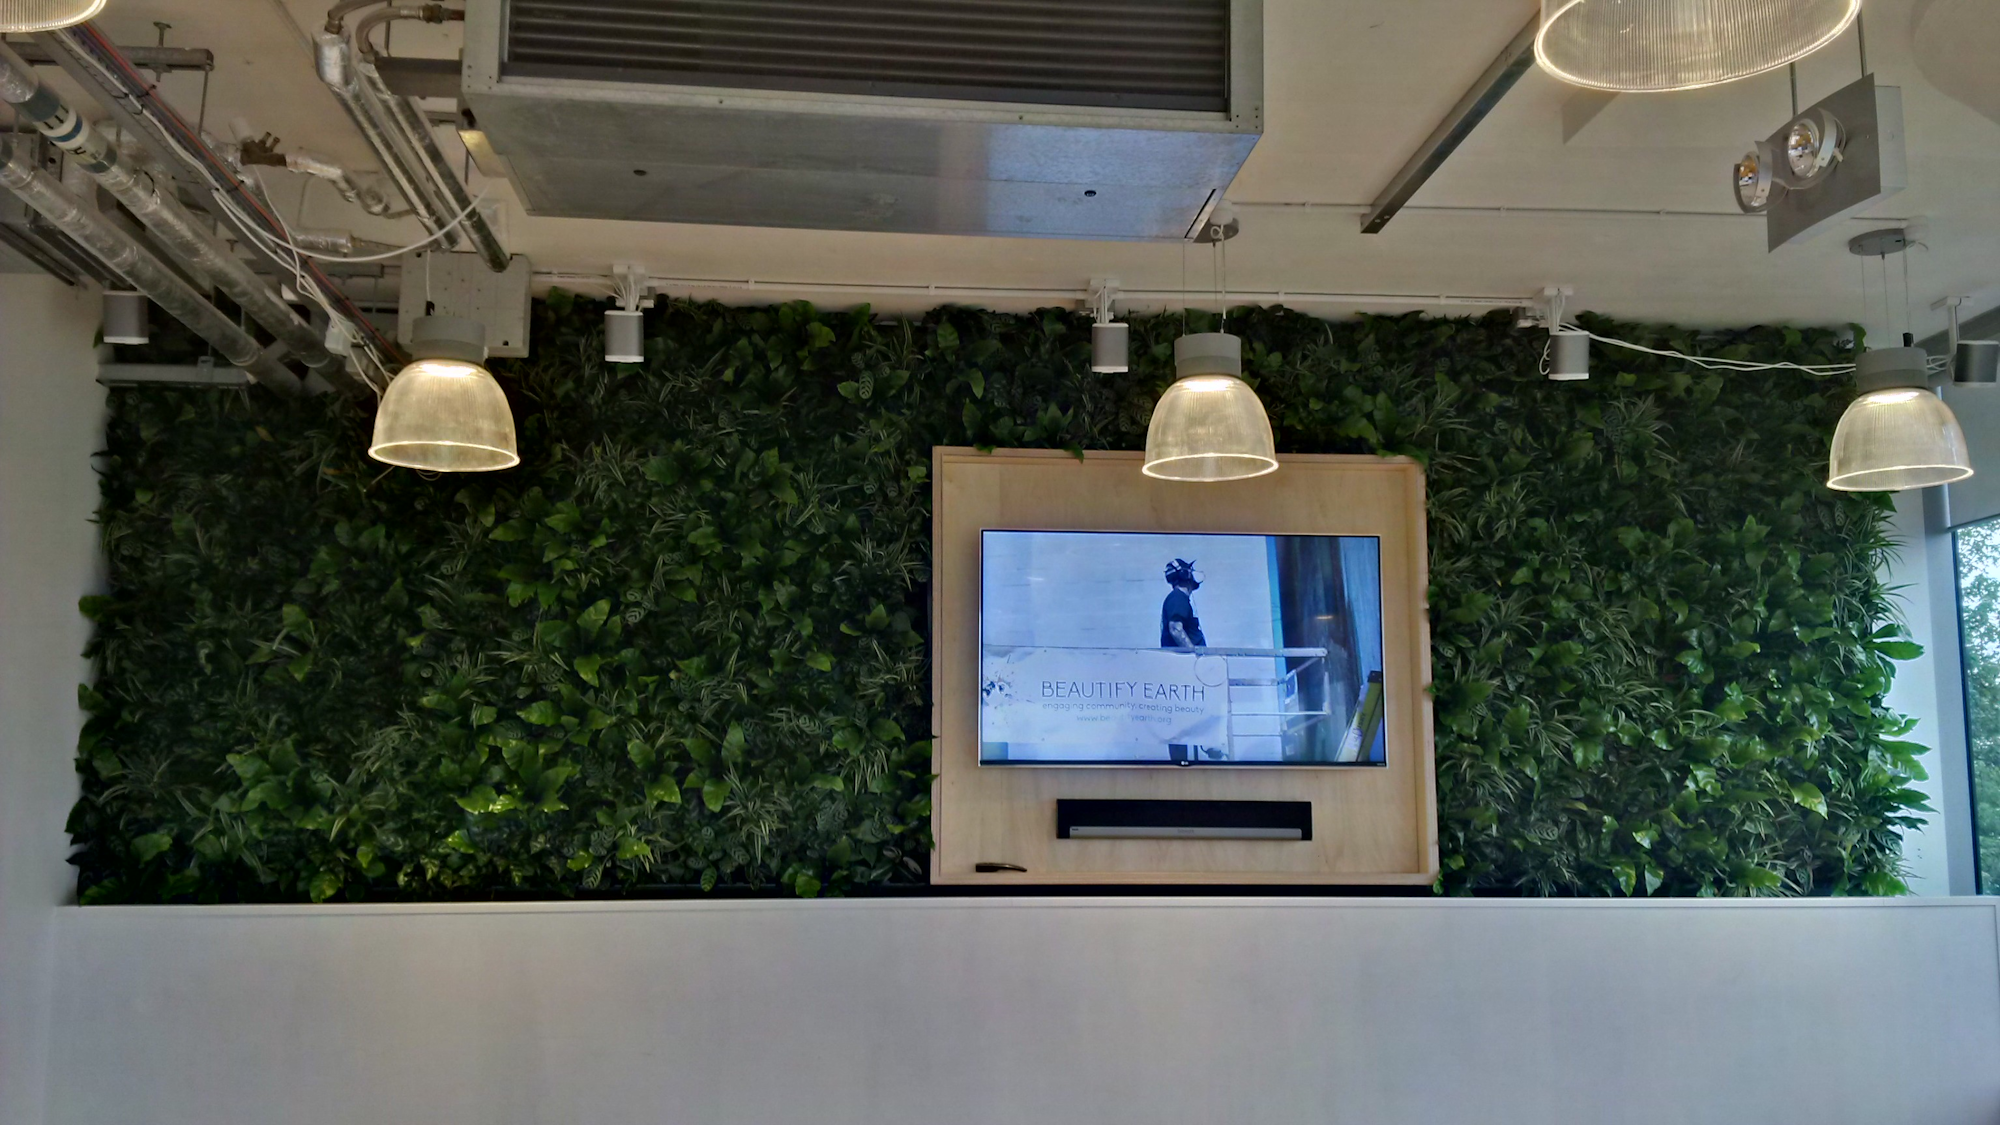 interior plants in a living wal surrounding a screen in a retail store